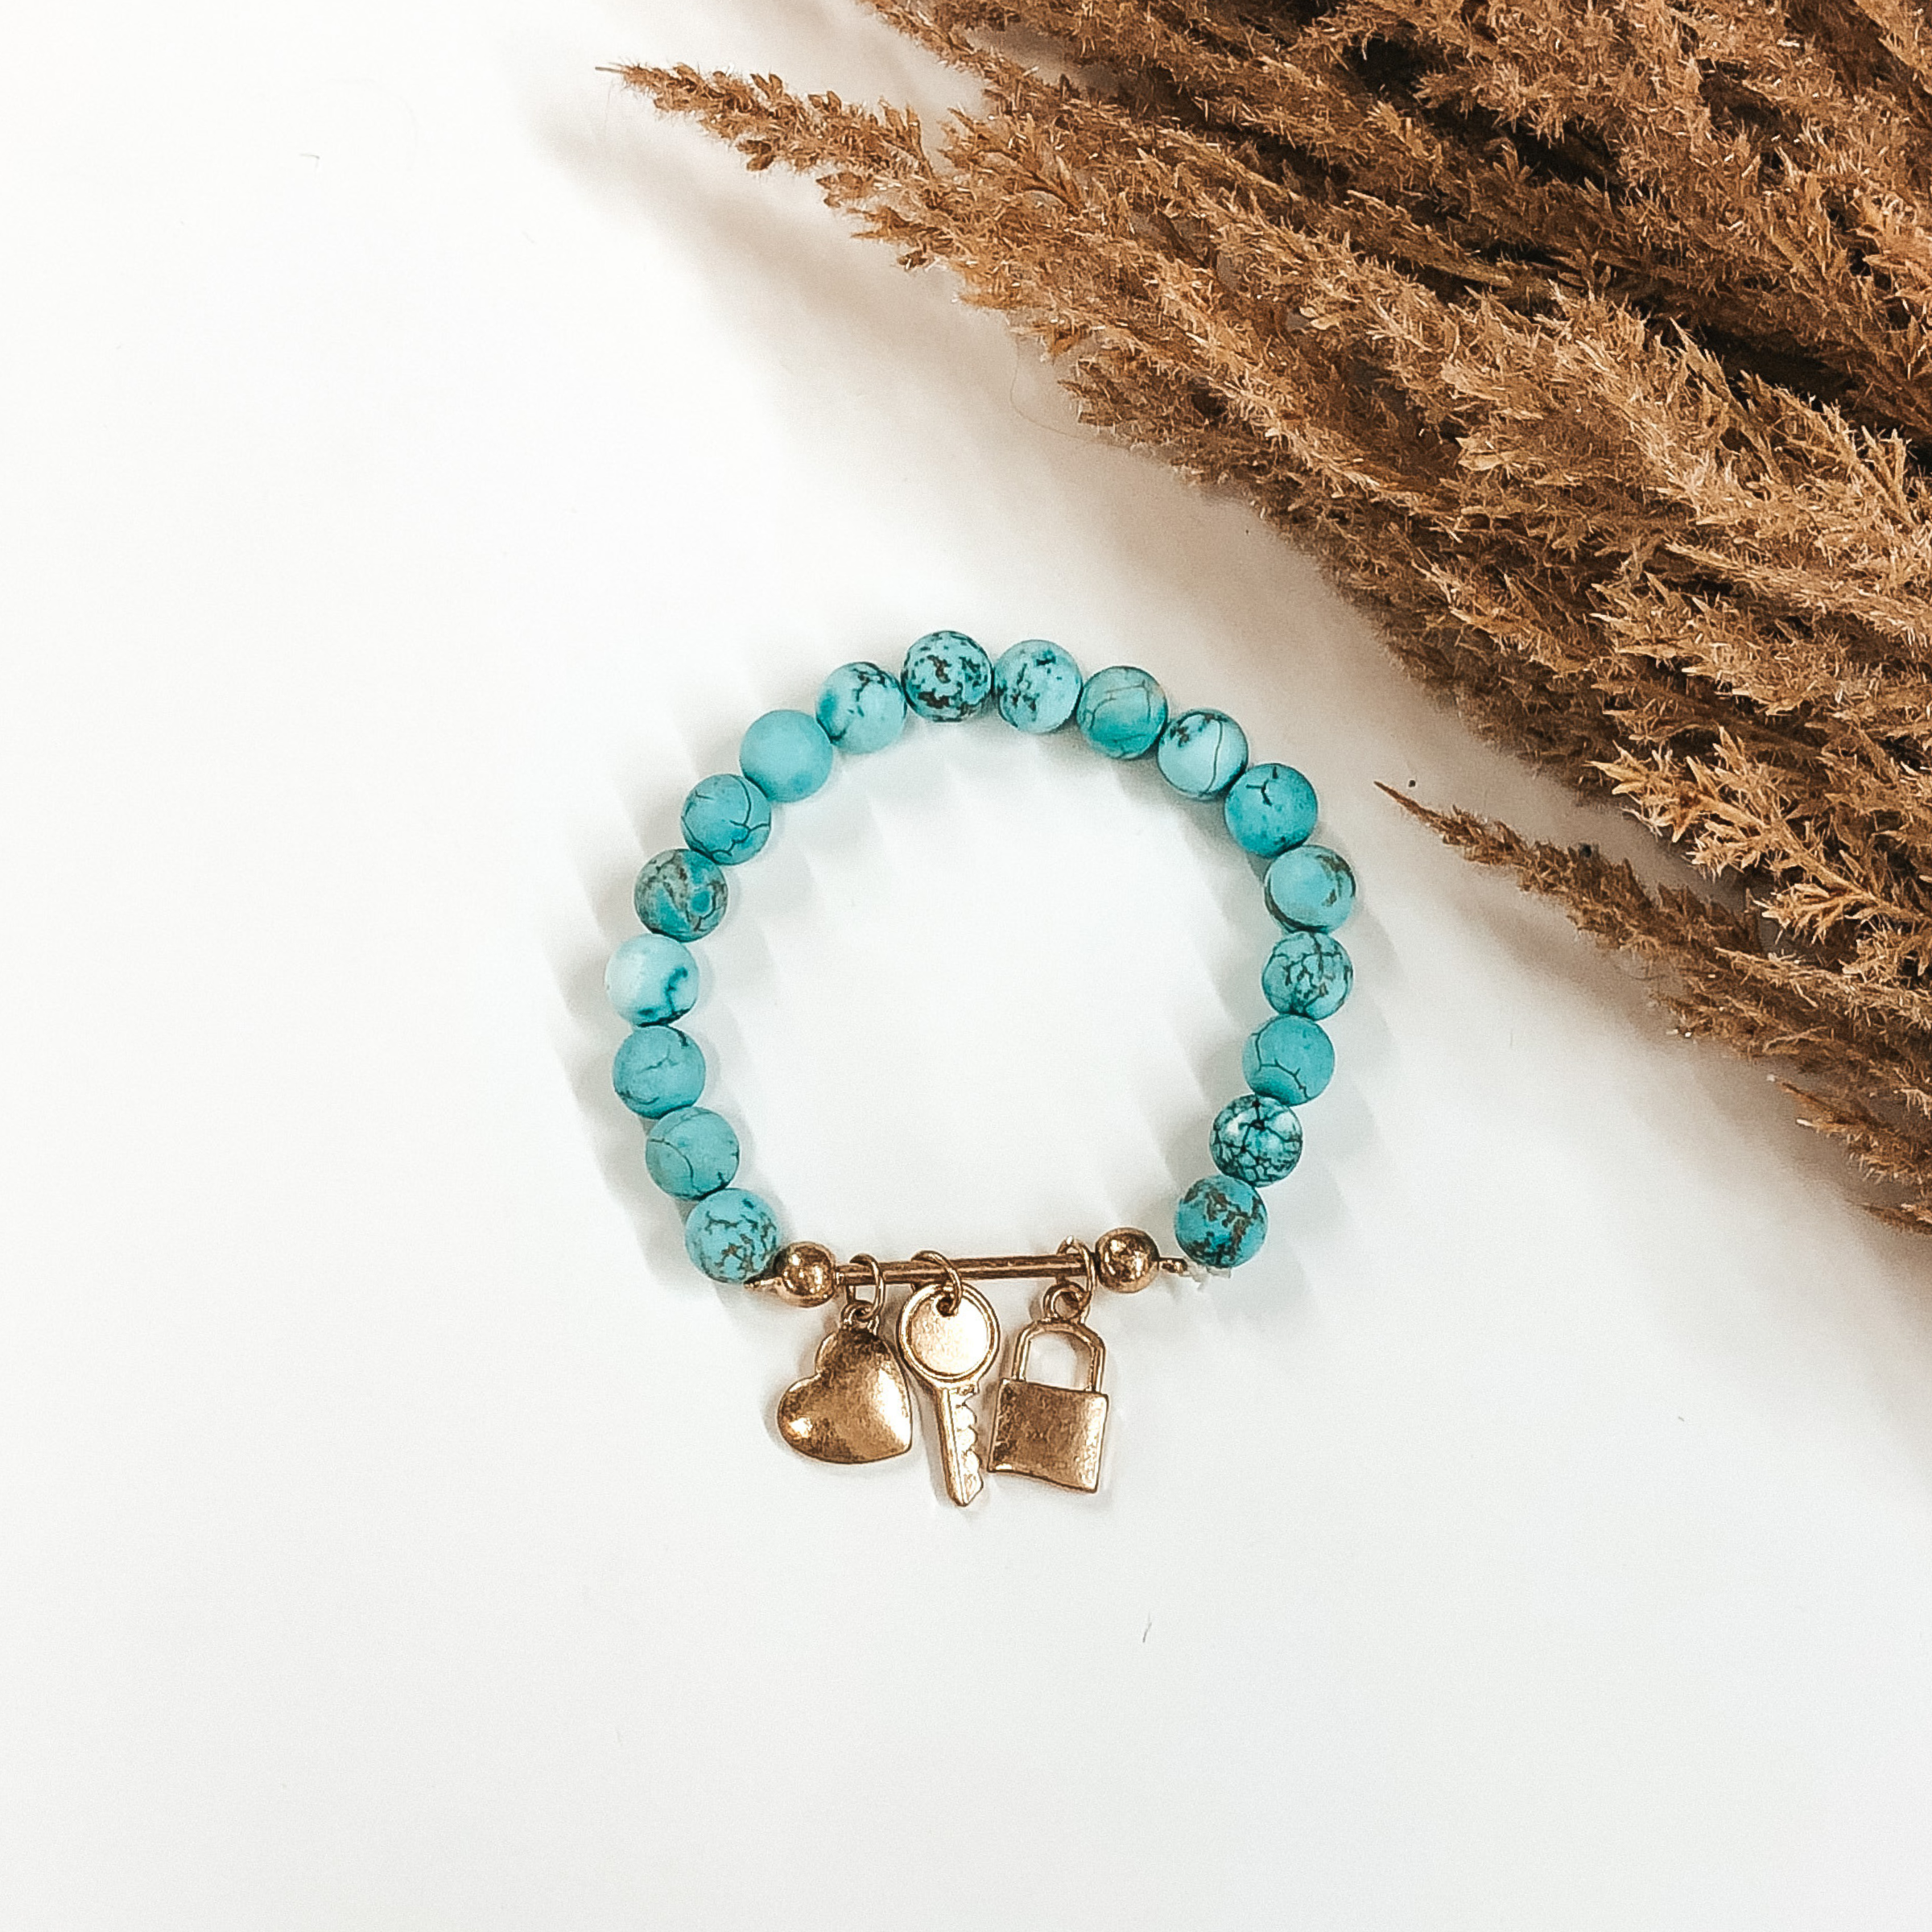 Lock Up Your Heart Bracelet in Turquoise/Gold - Giddy Up Glamour Boutique